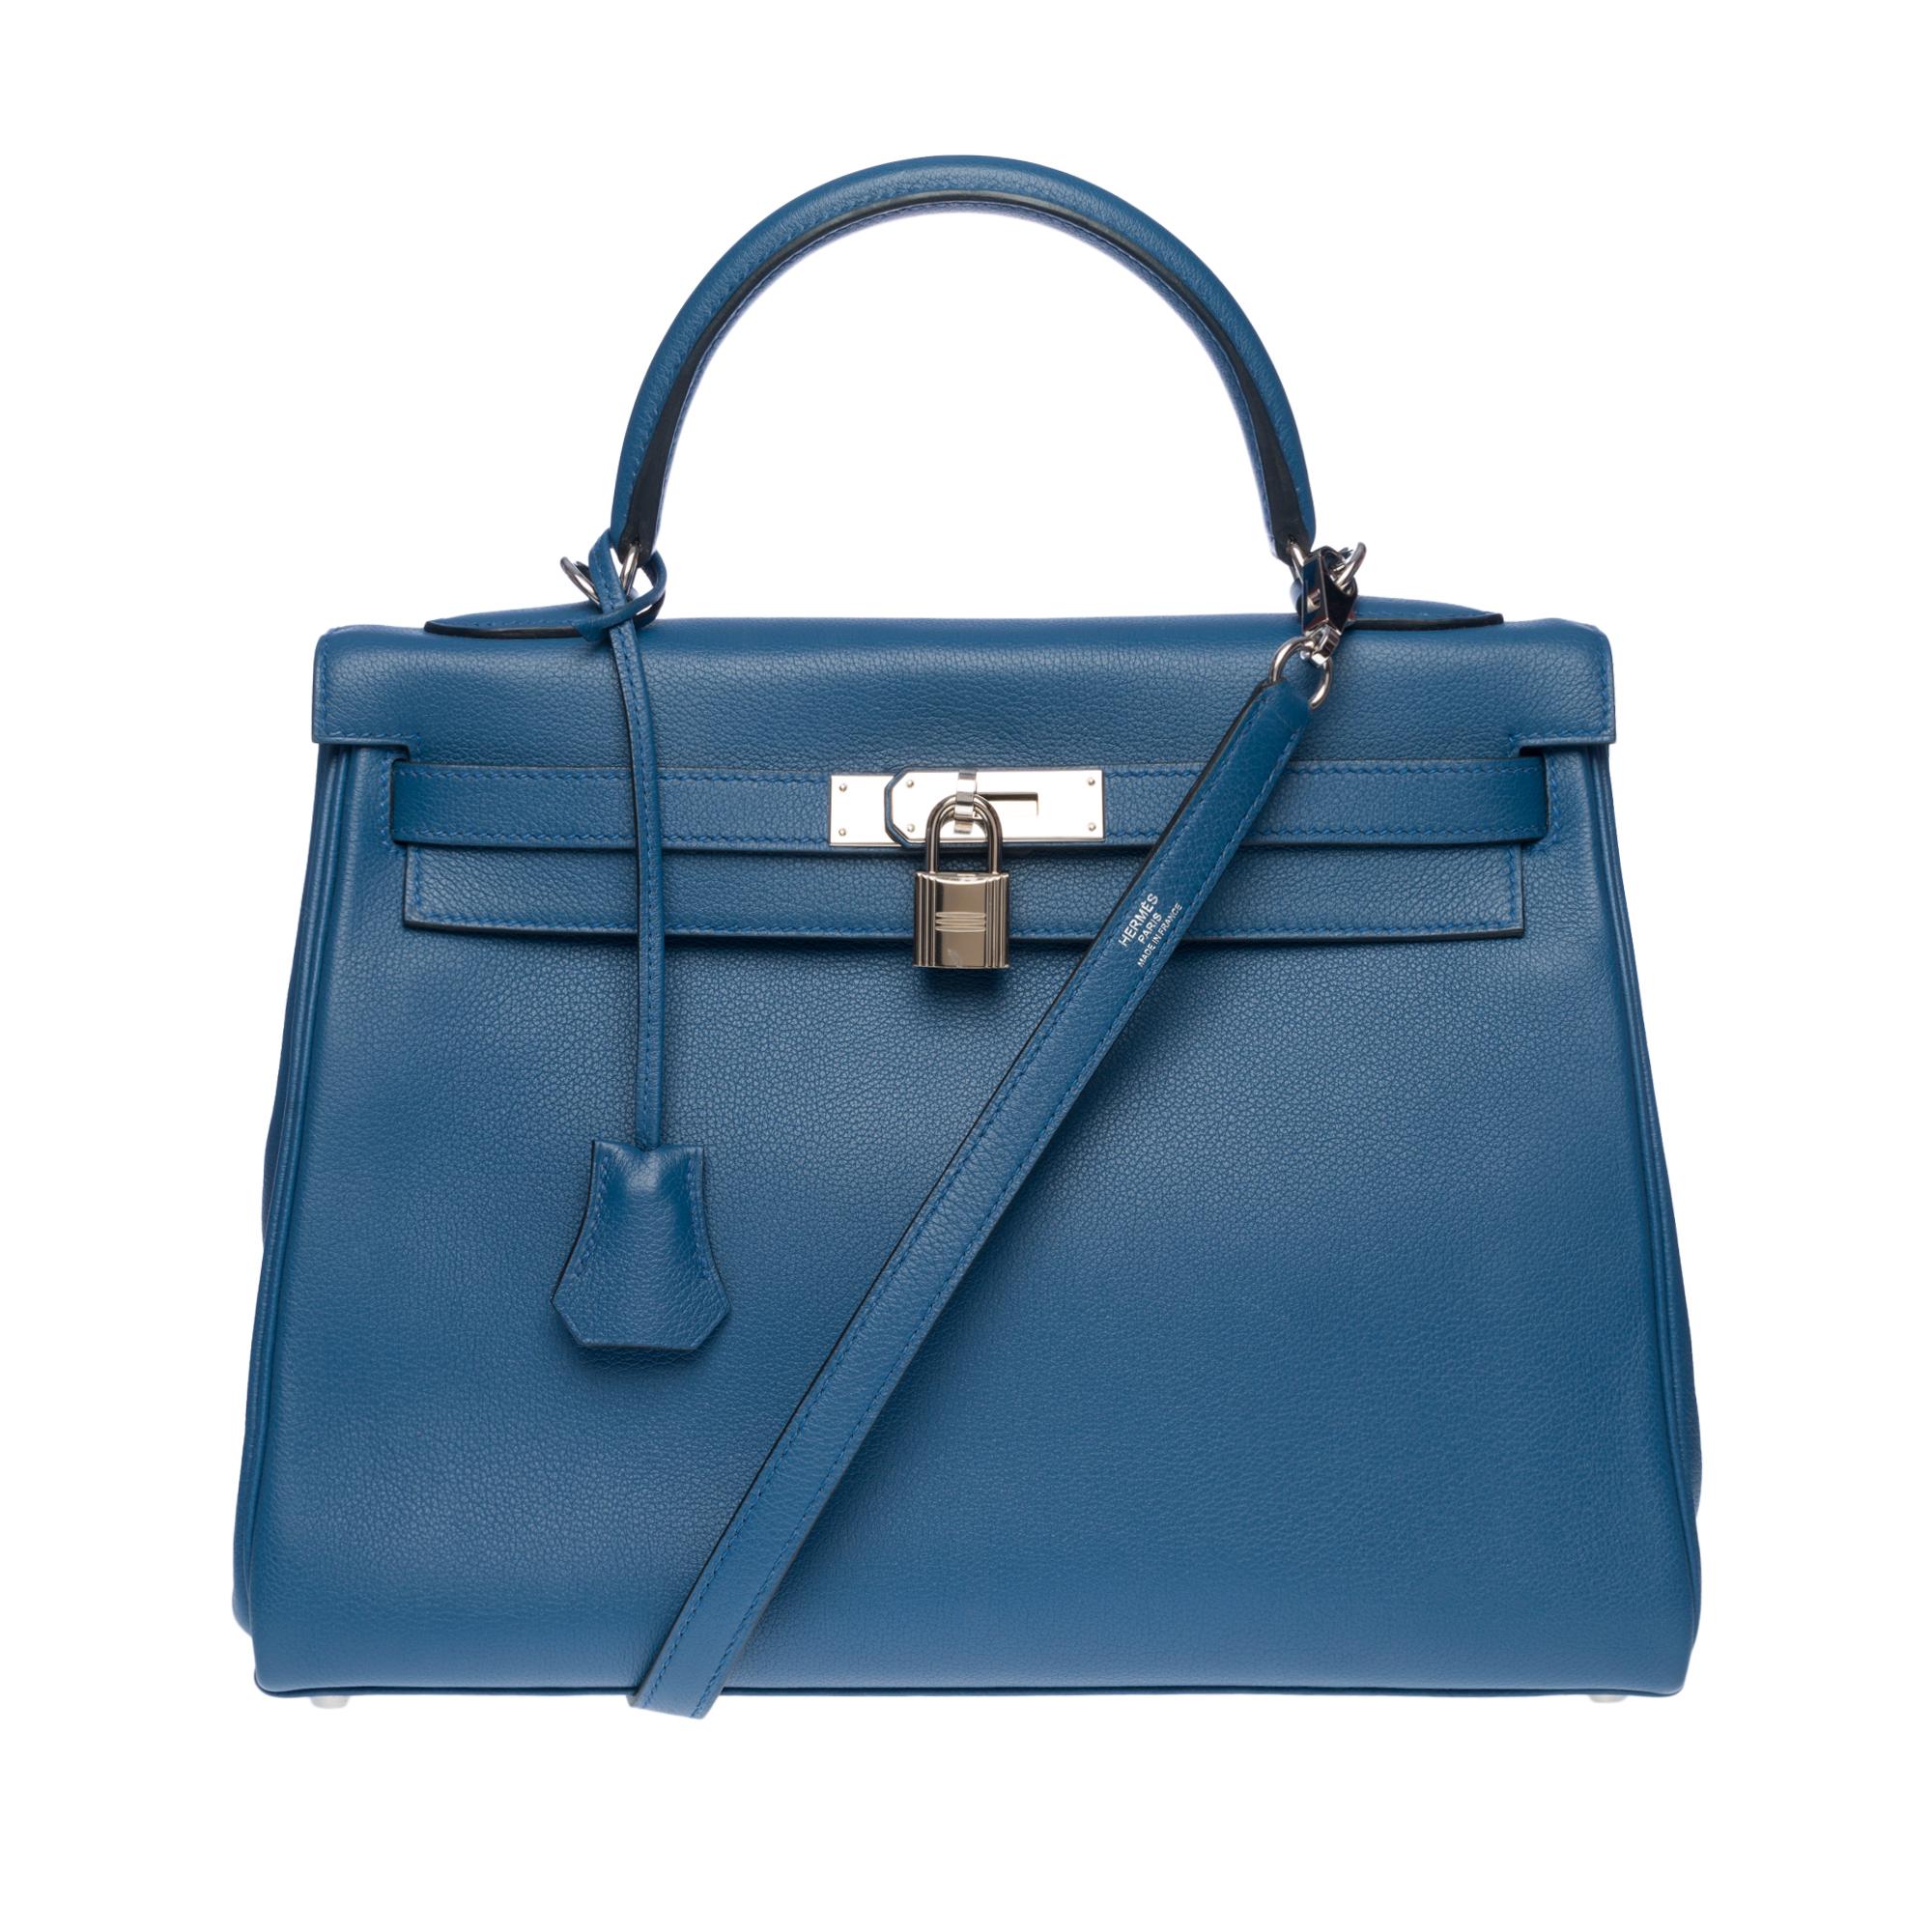 Gorgeous Hermes Kelly 32 handbag strap in Evercolor Blue Agate leather, palladium silver metal hardware, blue leather handle, removable blue evercolor leather shoulder strap for hand or shoulder support

Flap closure
Inner lining in blue leather one